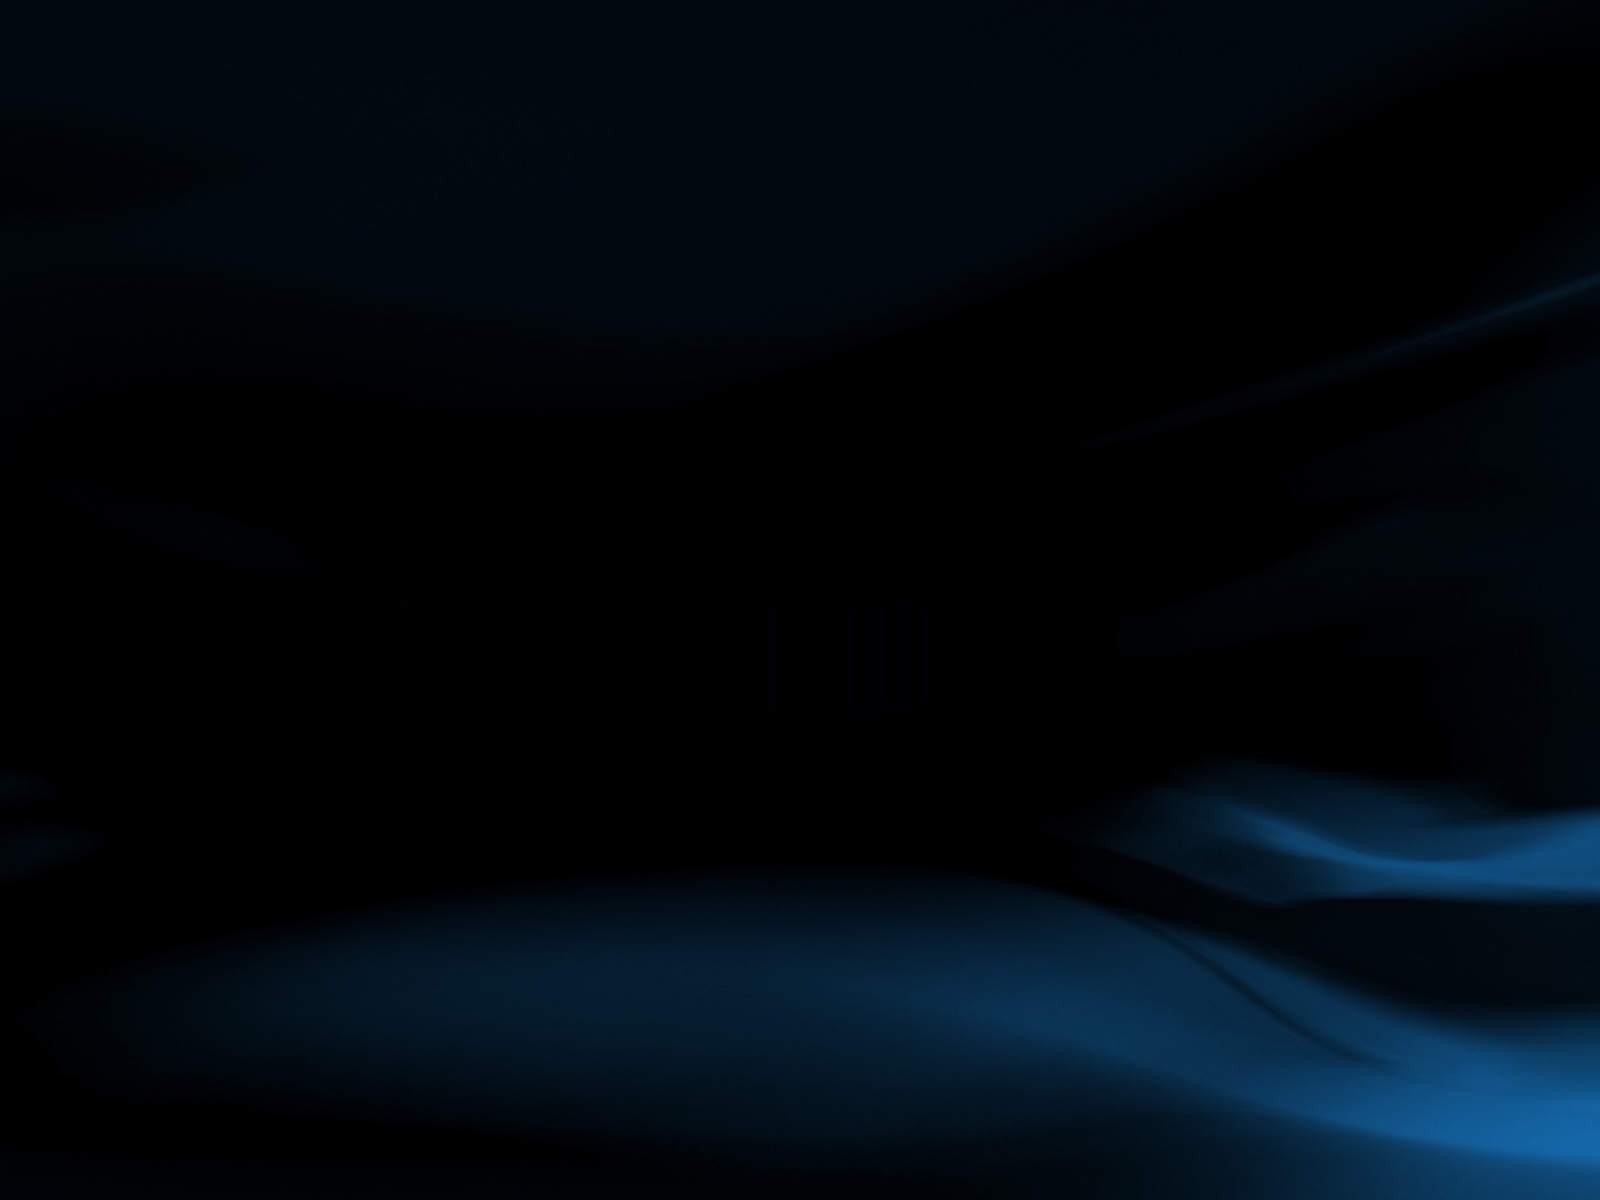 Wallpaper HD Black Blue Simple Abstract Design